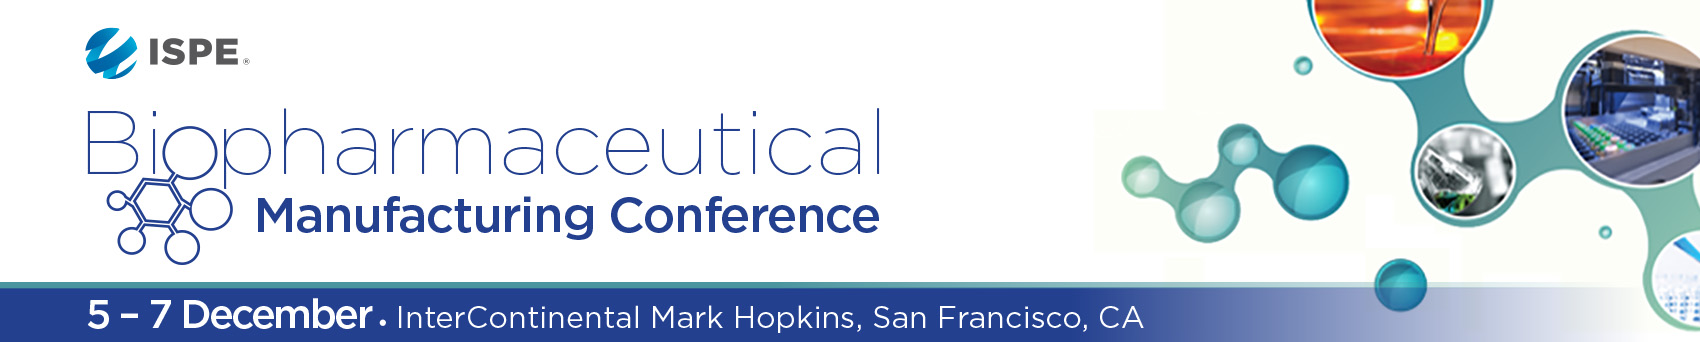 2016 ISPE Biopharmaceutical Manufacturing Conference